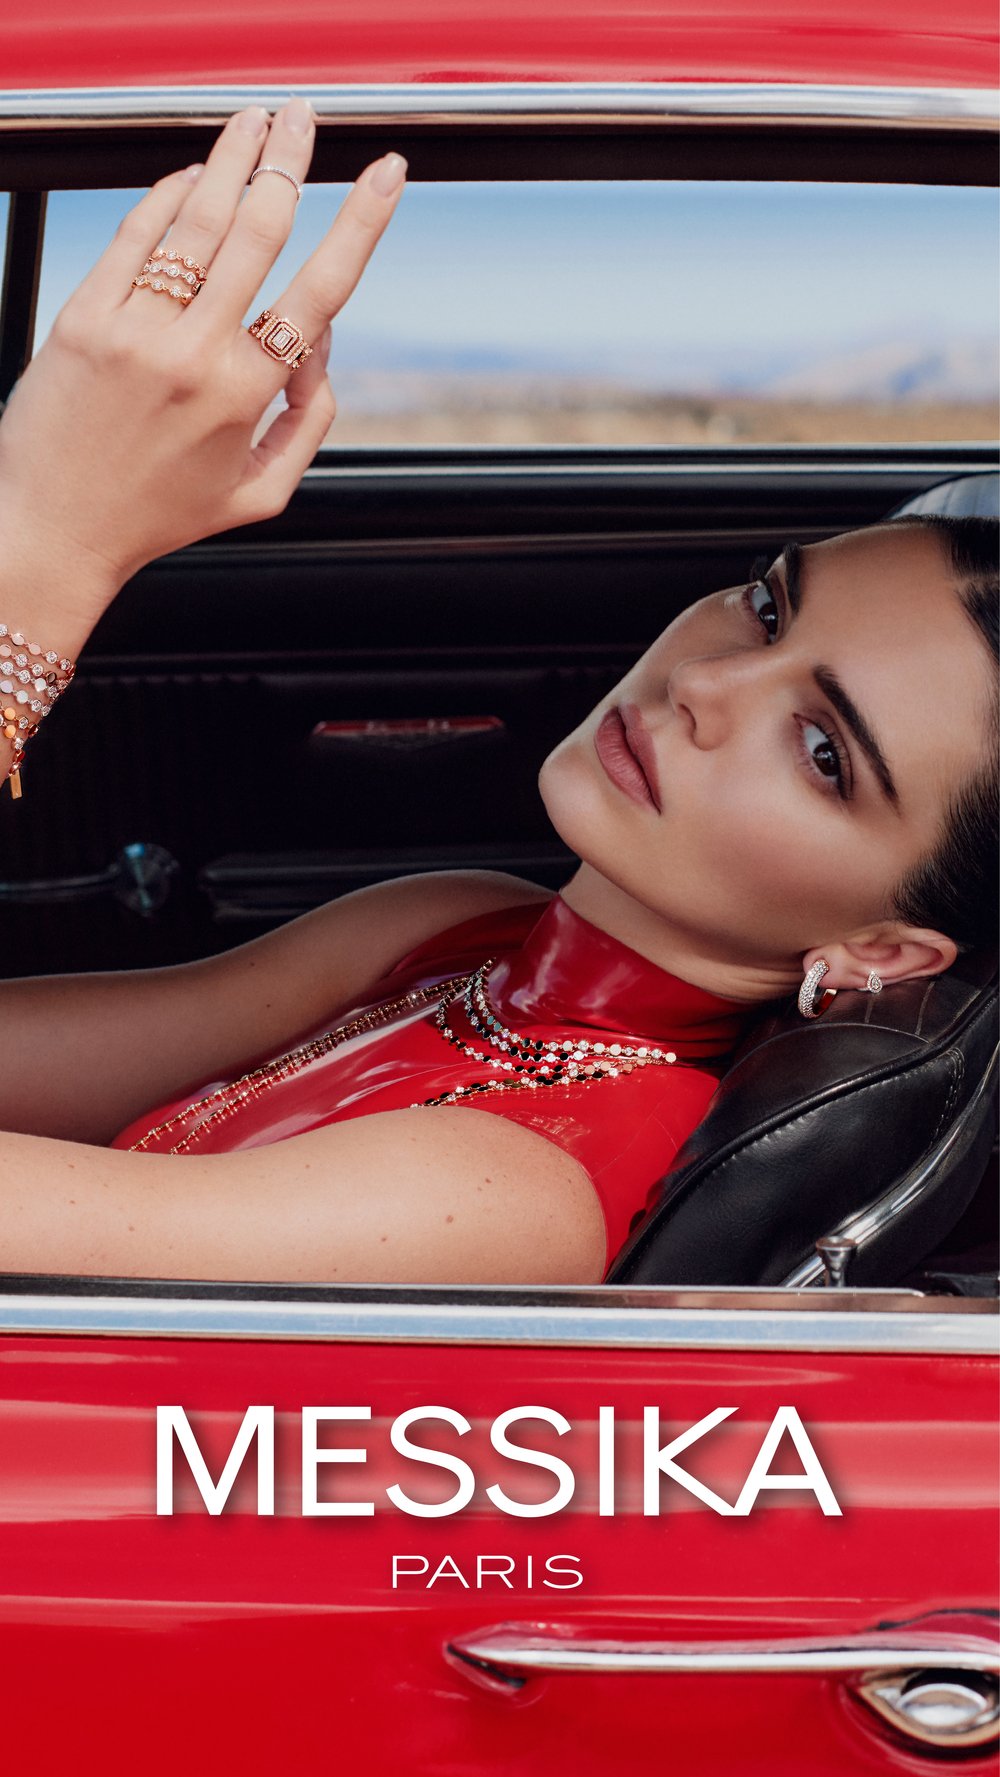 3 Messika Brand Campaign - Kendall Jenner - D-Vibes Collection © Chris Colls.jpg